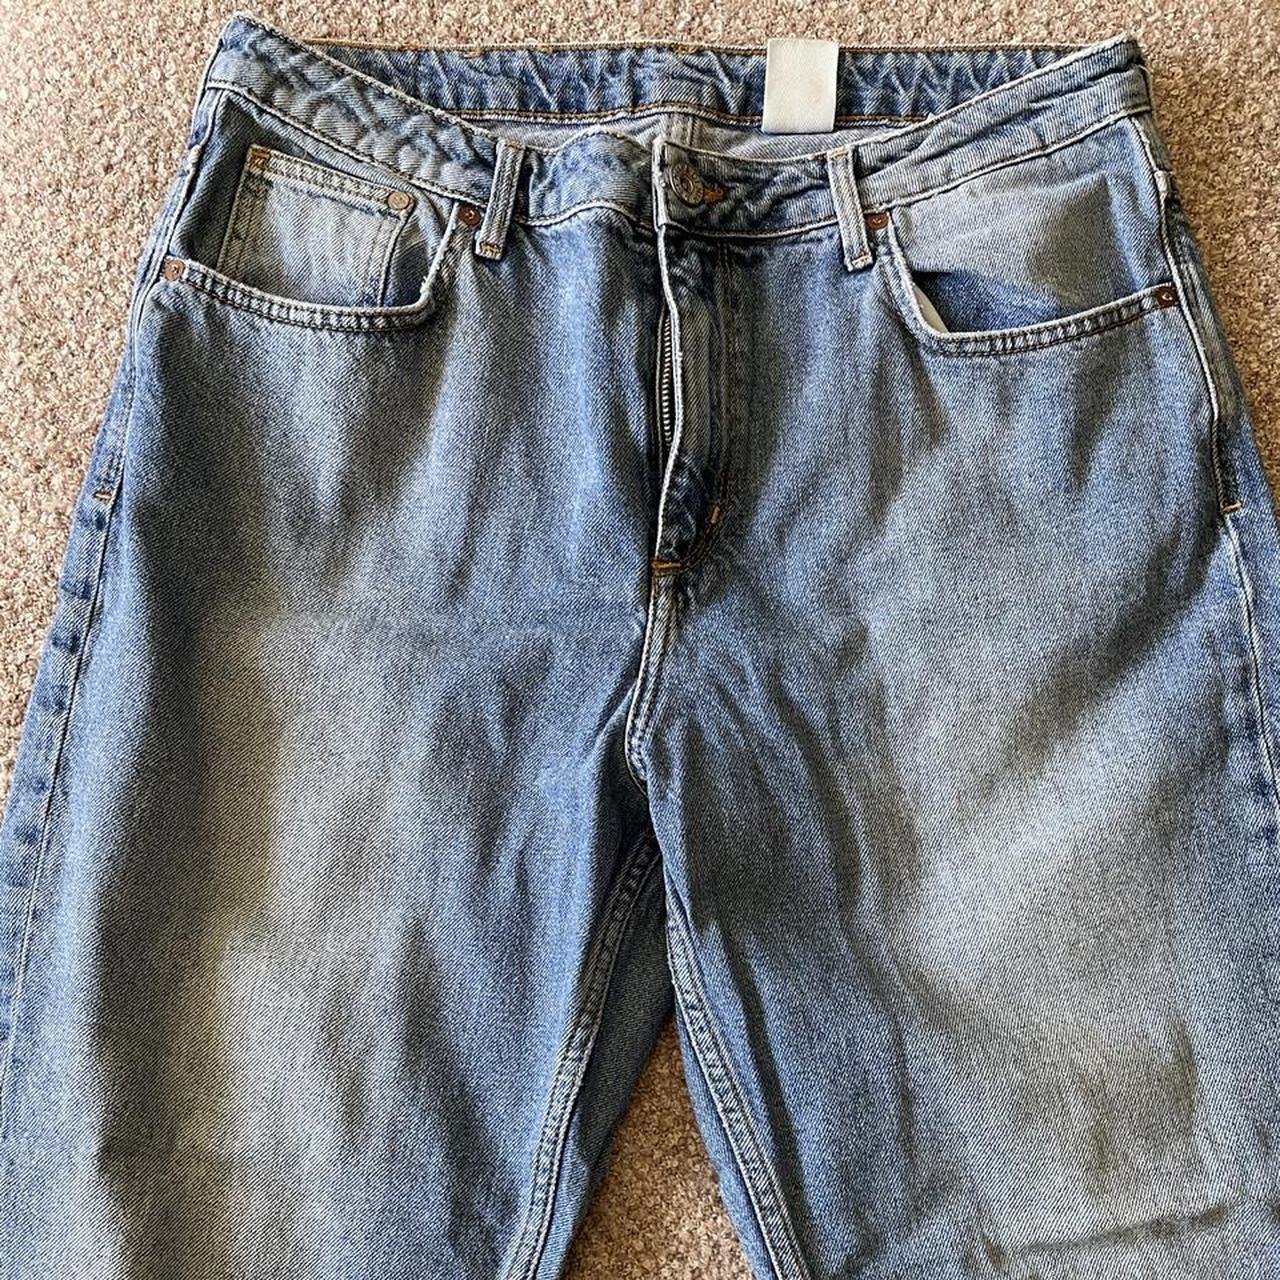 &Denim jeans. Great condition. Mix of dad jean and... - Depop